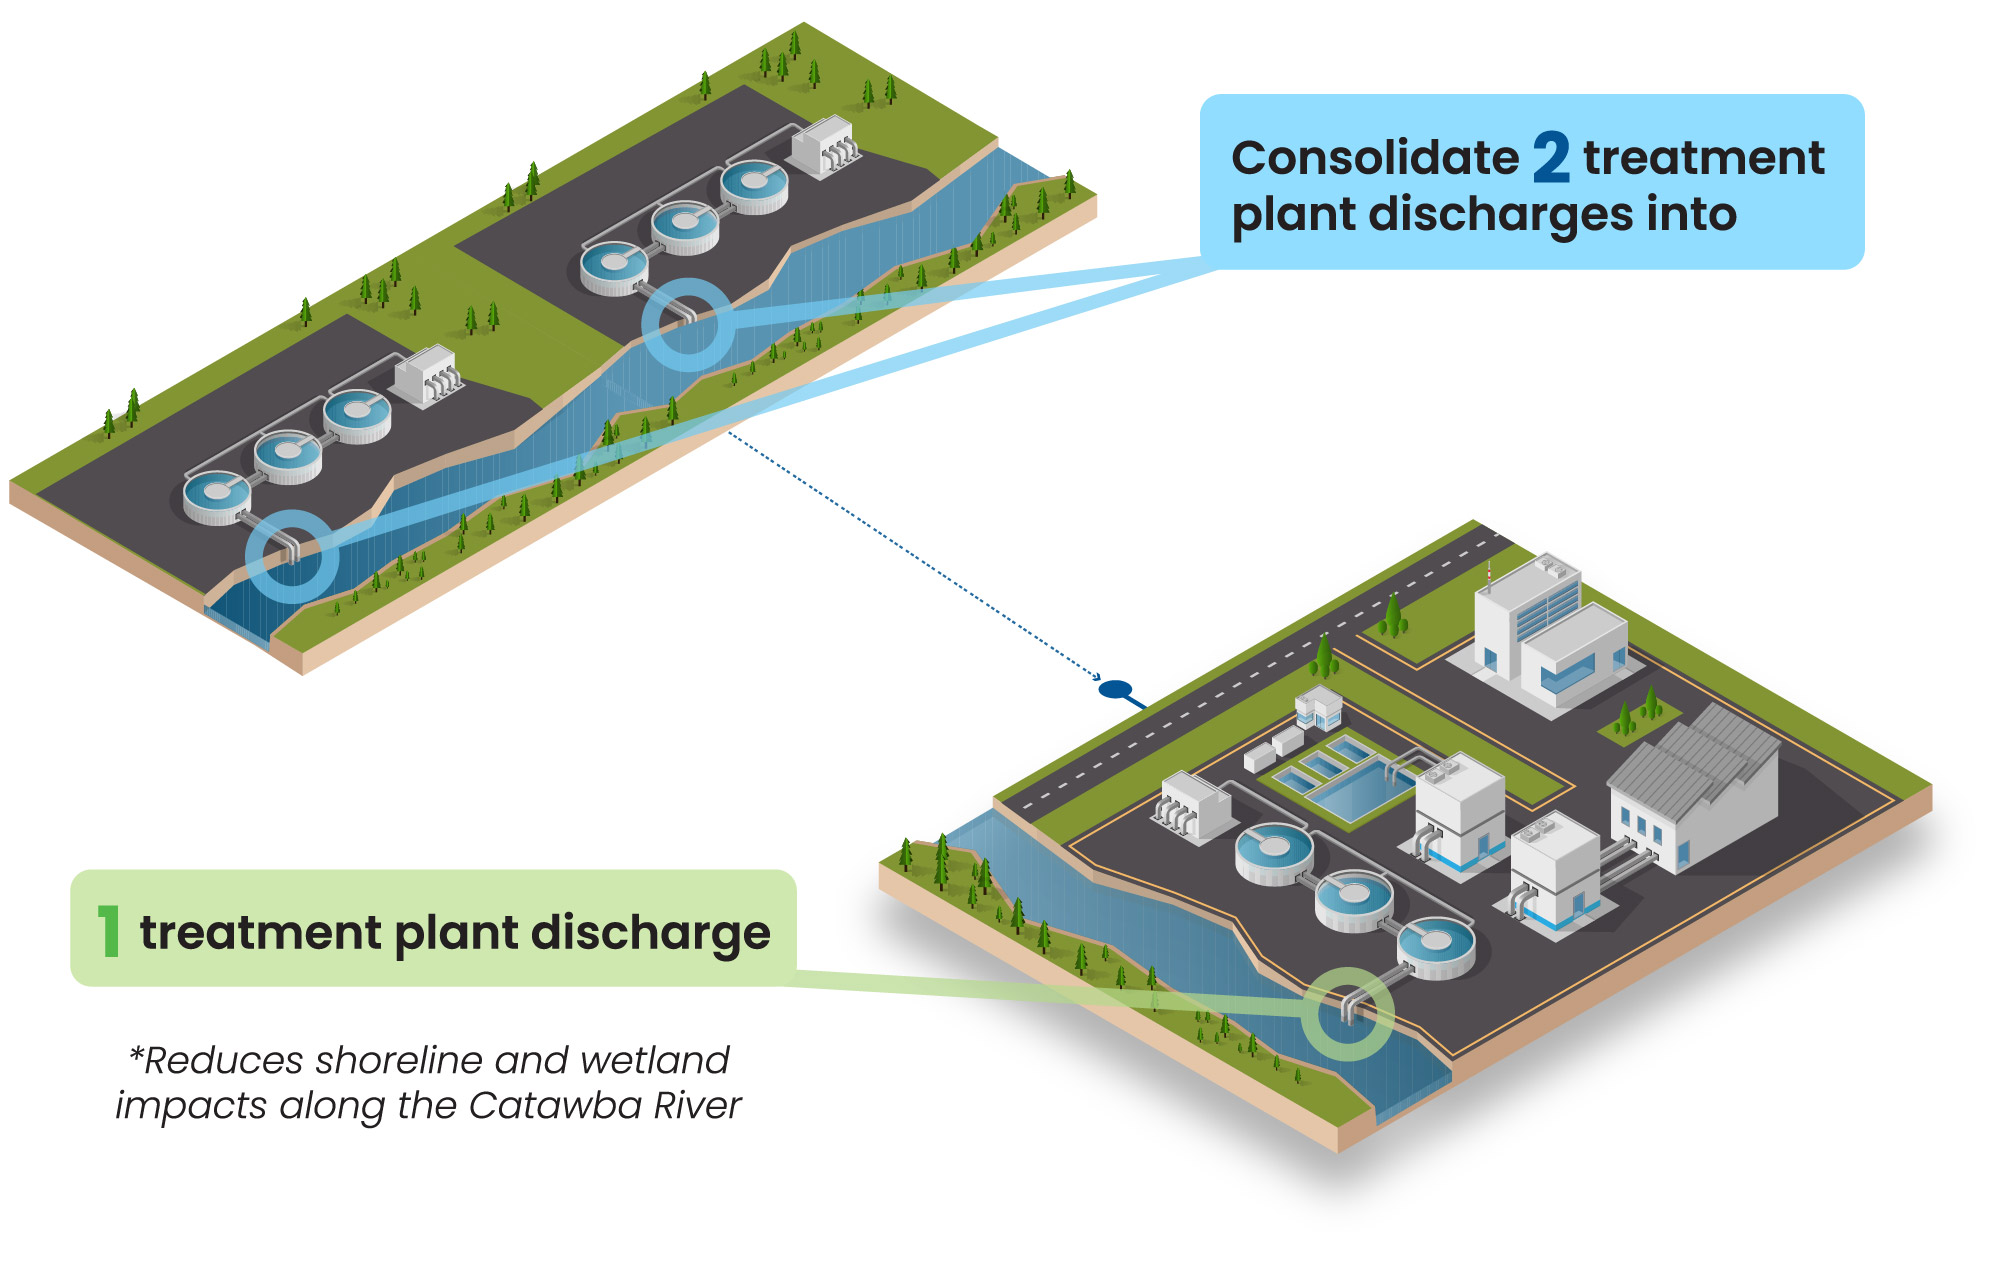 Graphic showing the consolidation of 2 treatment plant discharges into 1 treatment plant discharge.